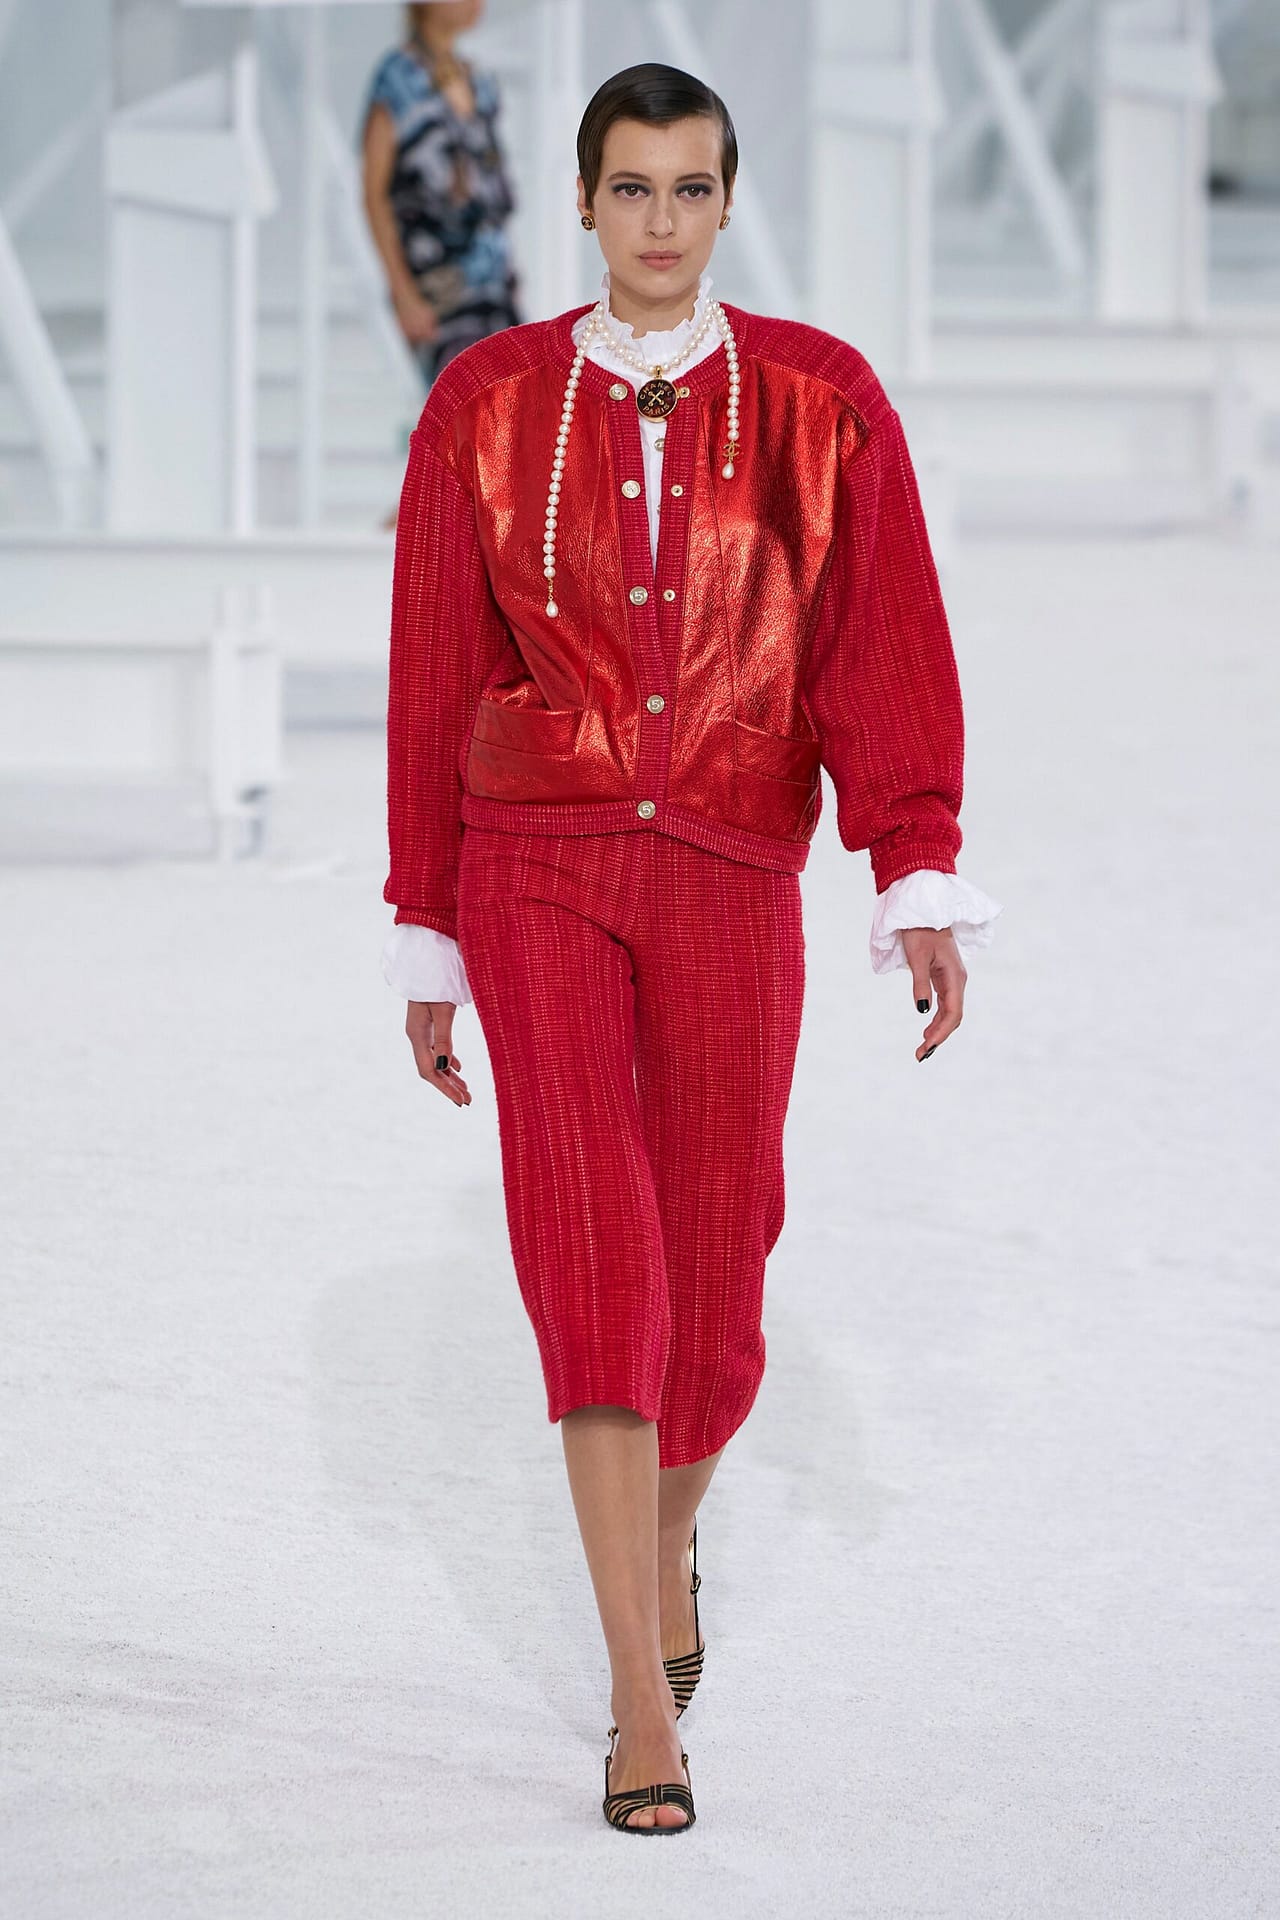 Chanel Ready-to-Wear Spring 2020